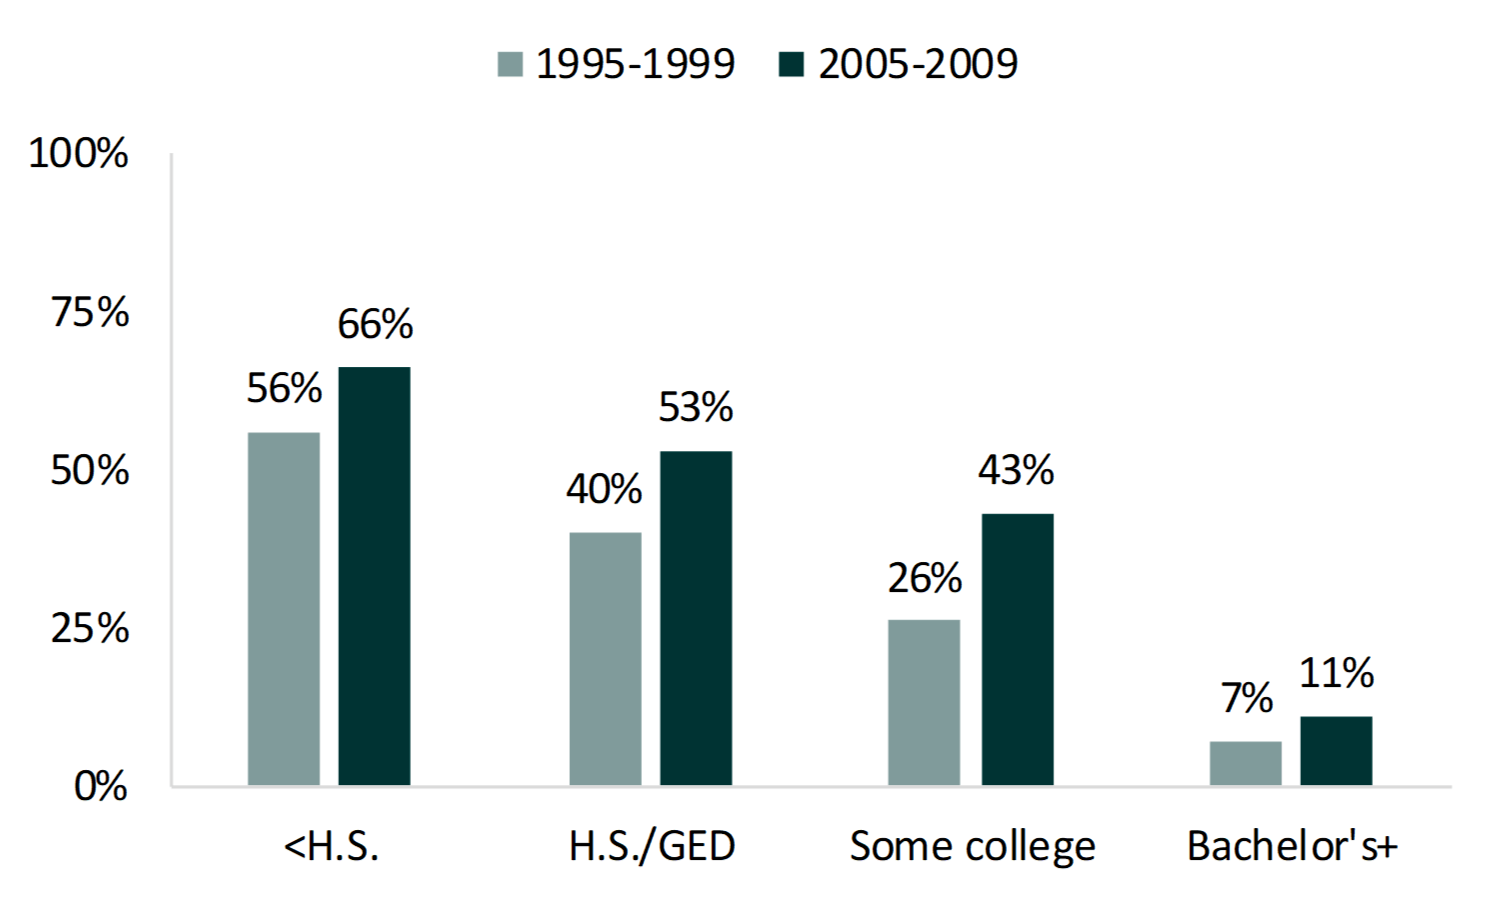 teal shades in bar chart showing %'s of Cohabitors with Shared Biological Children by Mother’s Education